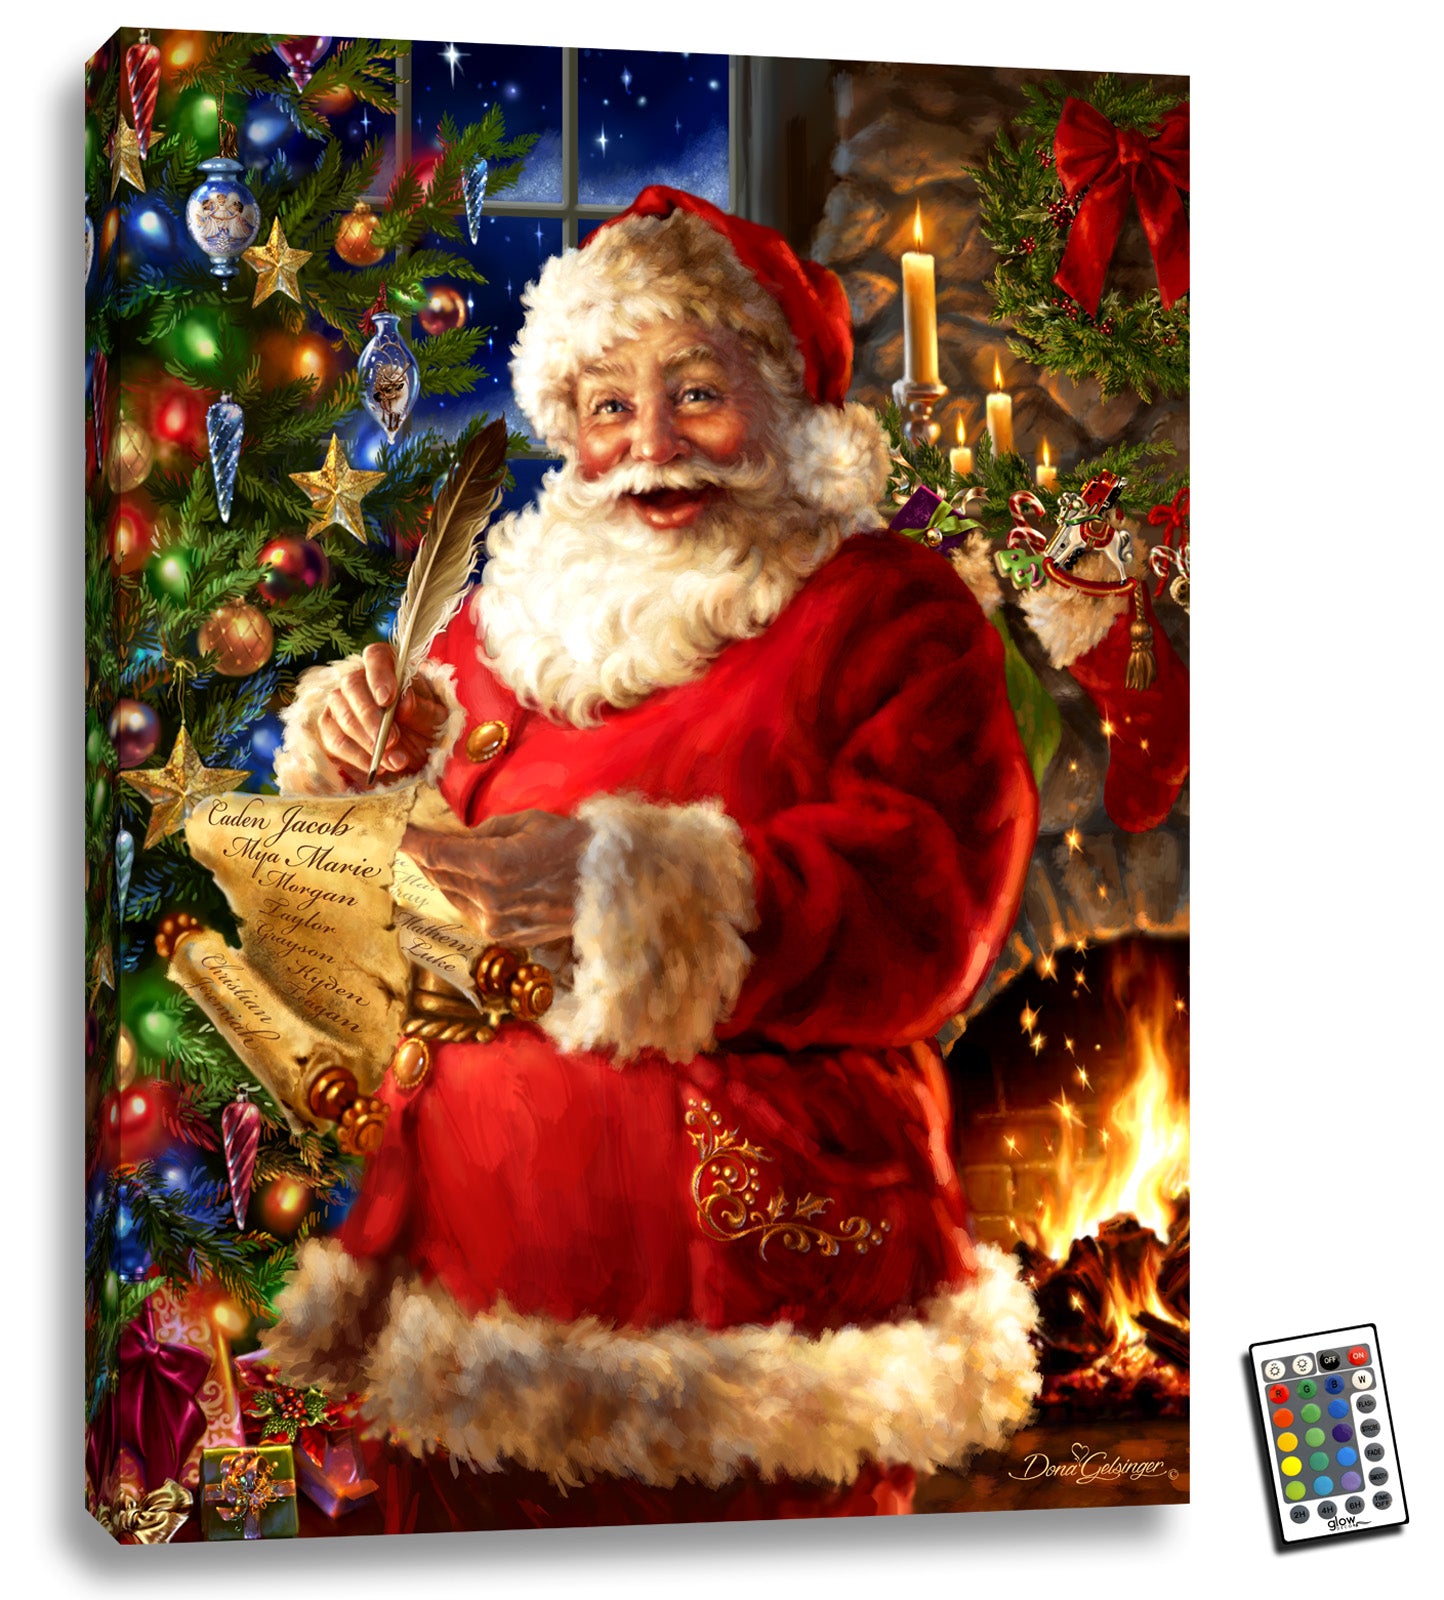  This stunning 18x24 masterpiece captures the magic of Christmas as Santa Claus works diligently on his naughty and nice list with a beautifully decorated Christmas tree and roaring fireplace in the background.